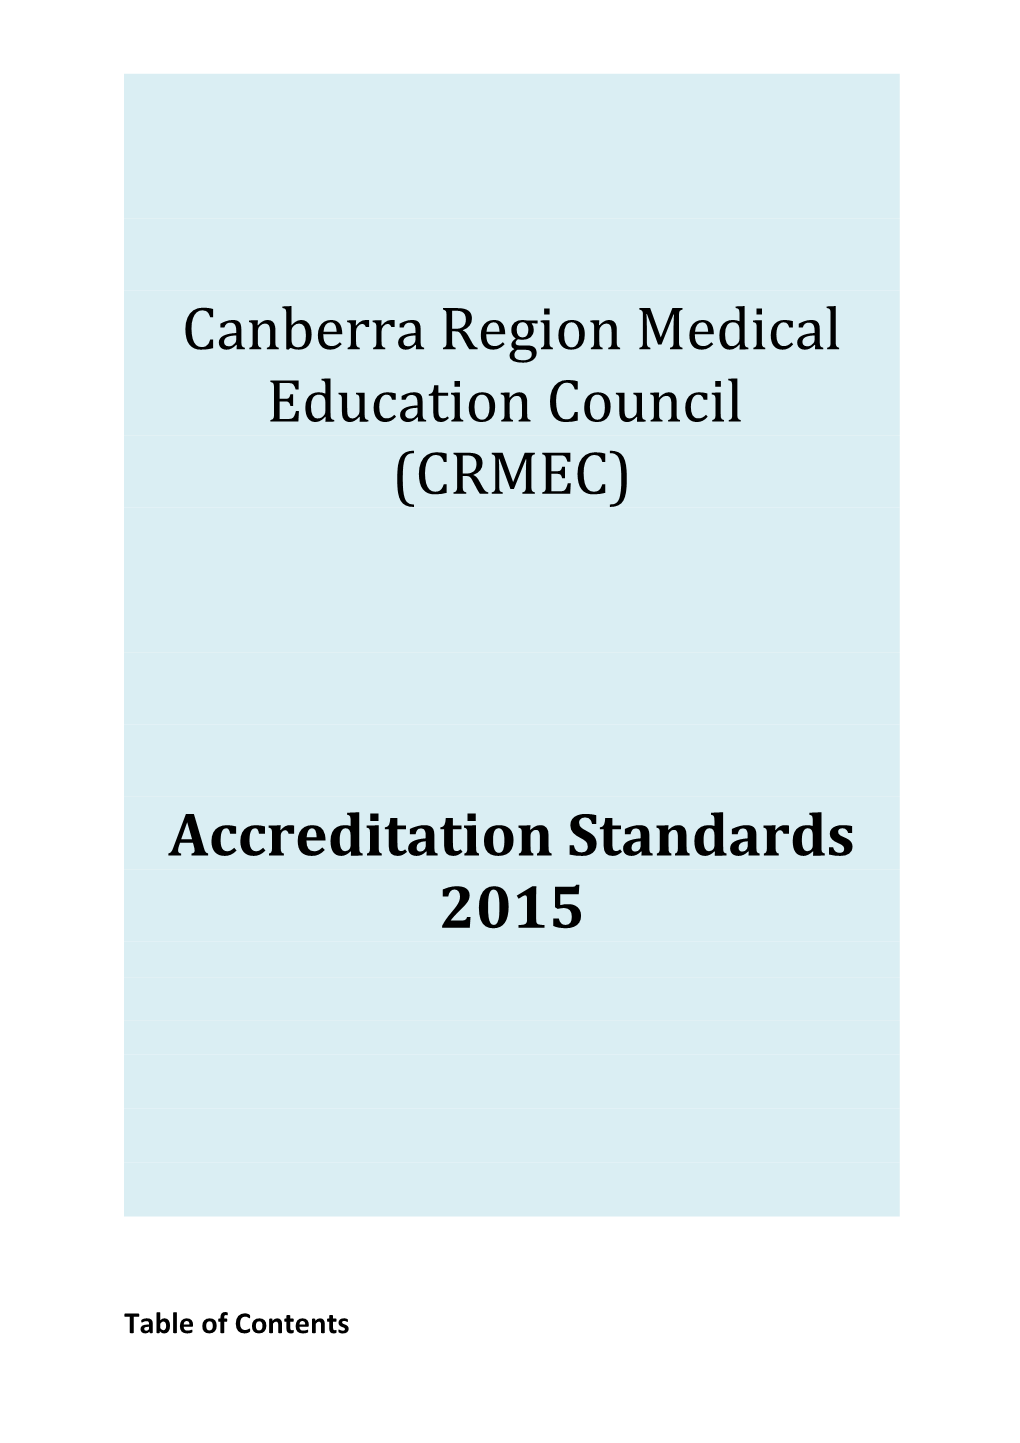 Canberra Region Prevocational Management Committee (CRPMC)